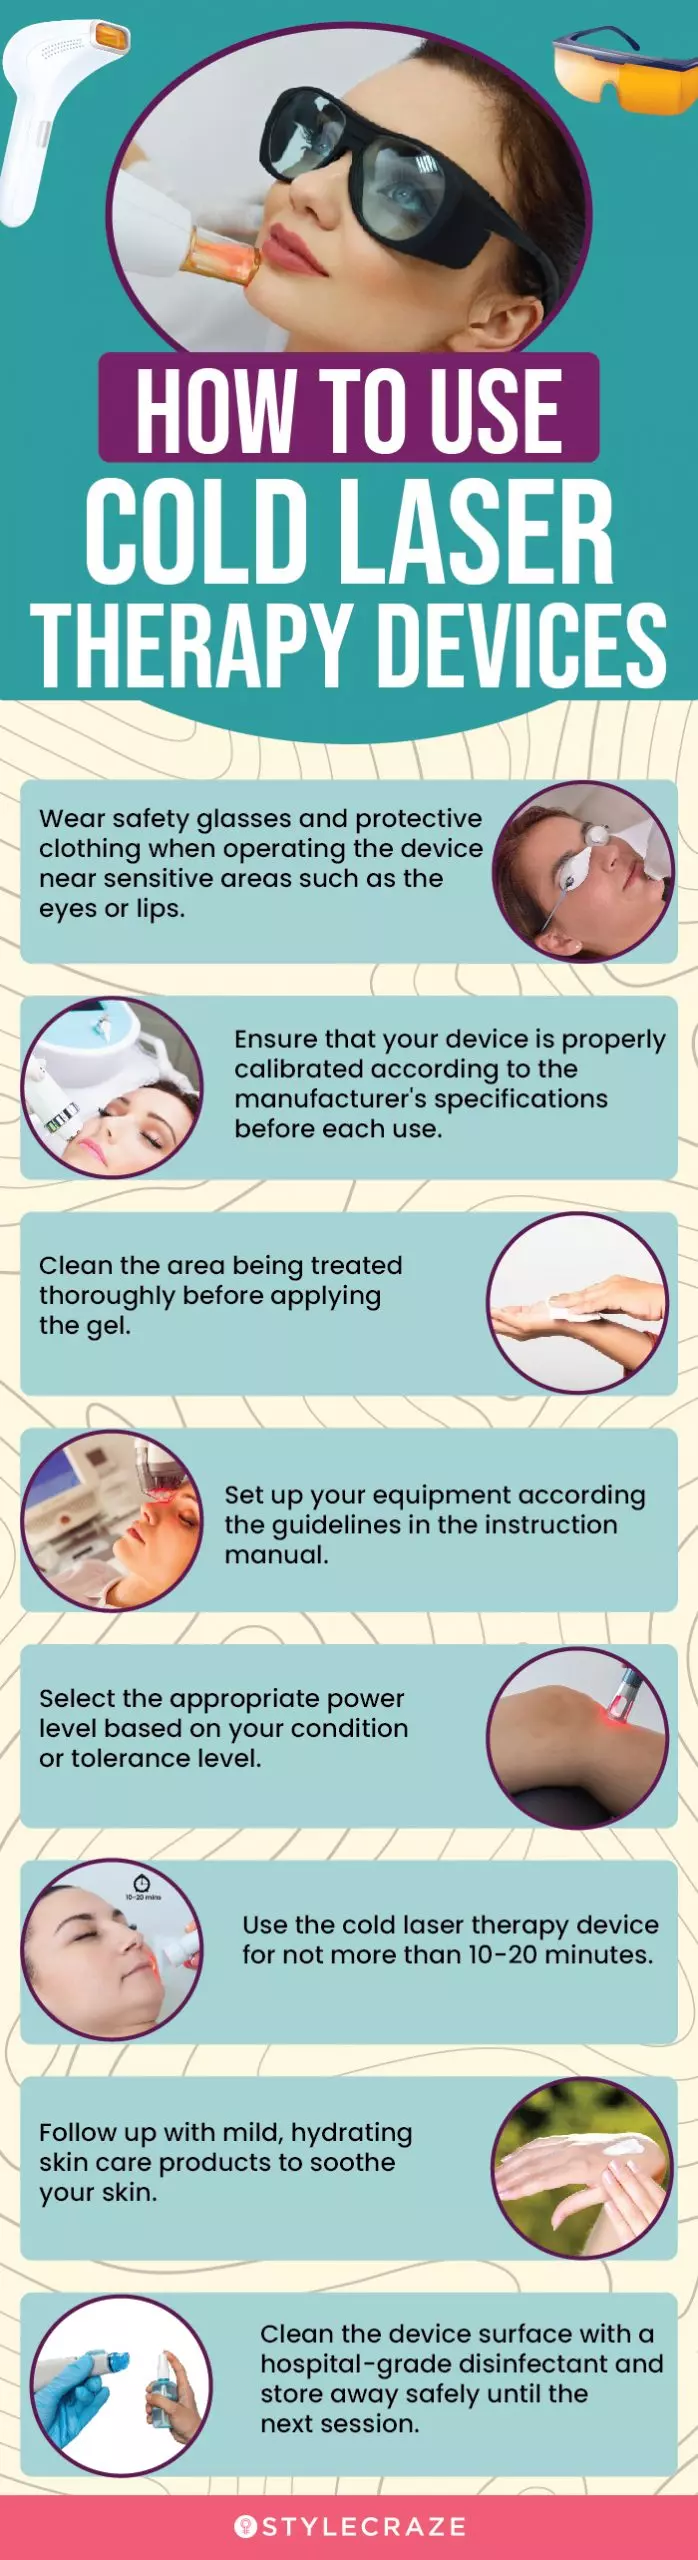 How To Use Cold Laser Therapy Devices (infographic)